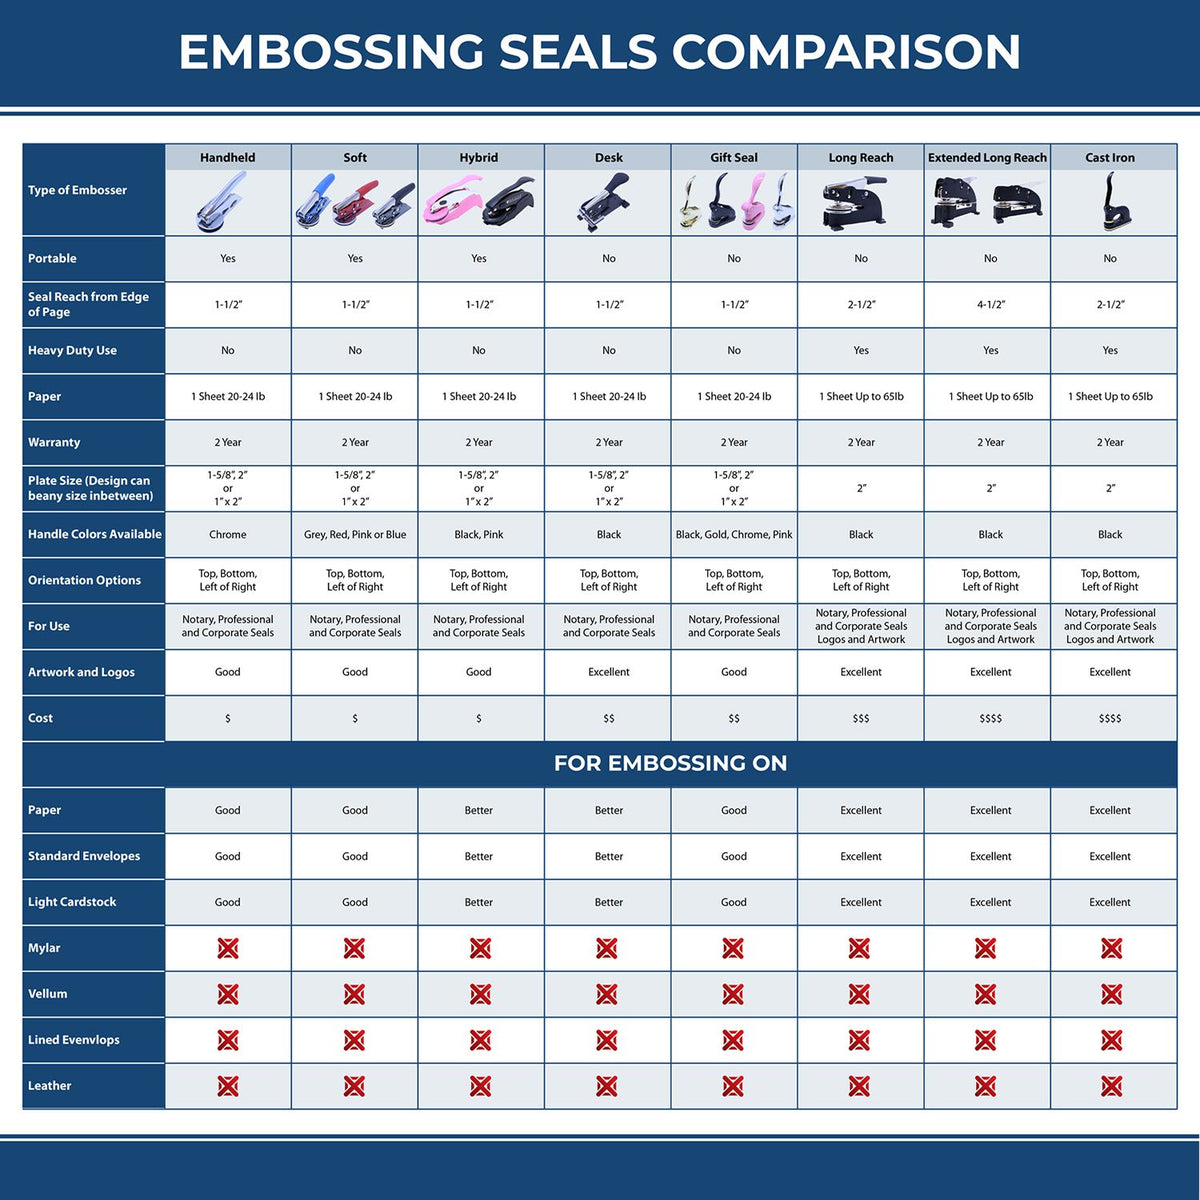 Professional Gold Gift Seal Embosser 3026 Embossing Seal Comparison